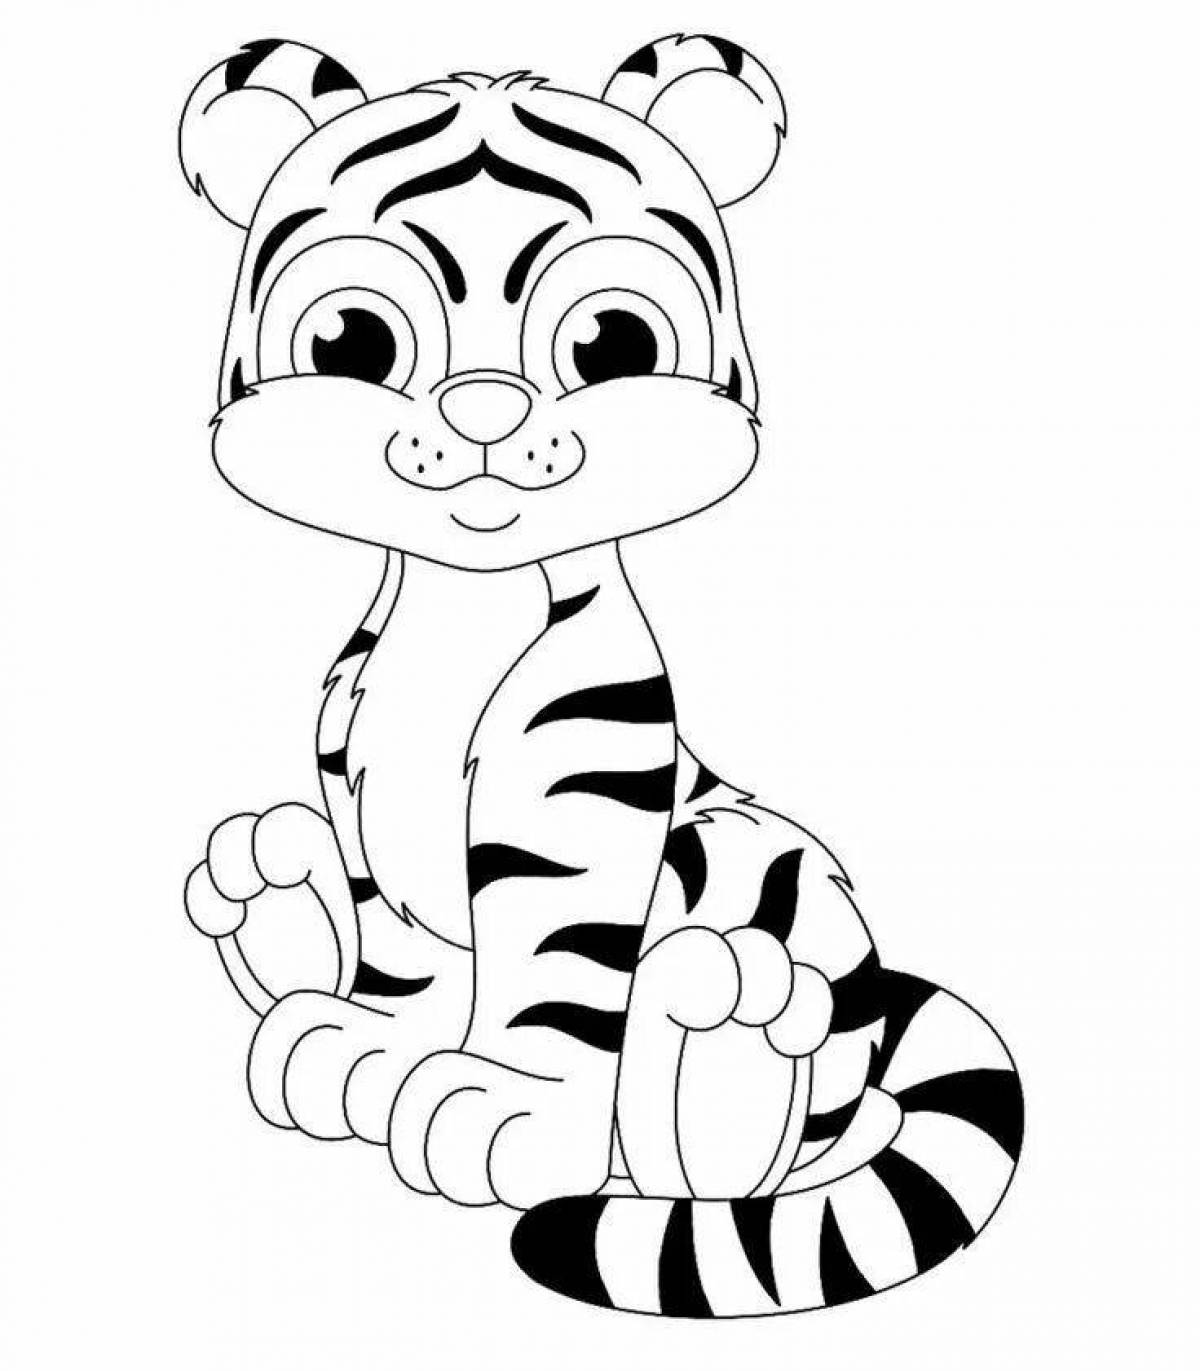 Intriguing tiger and lion coloring book for kids